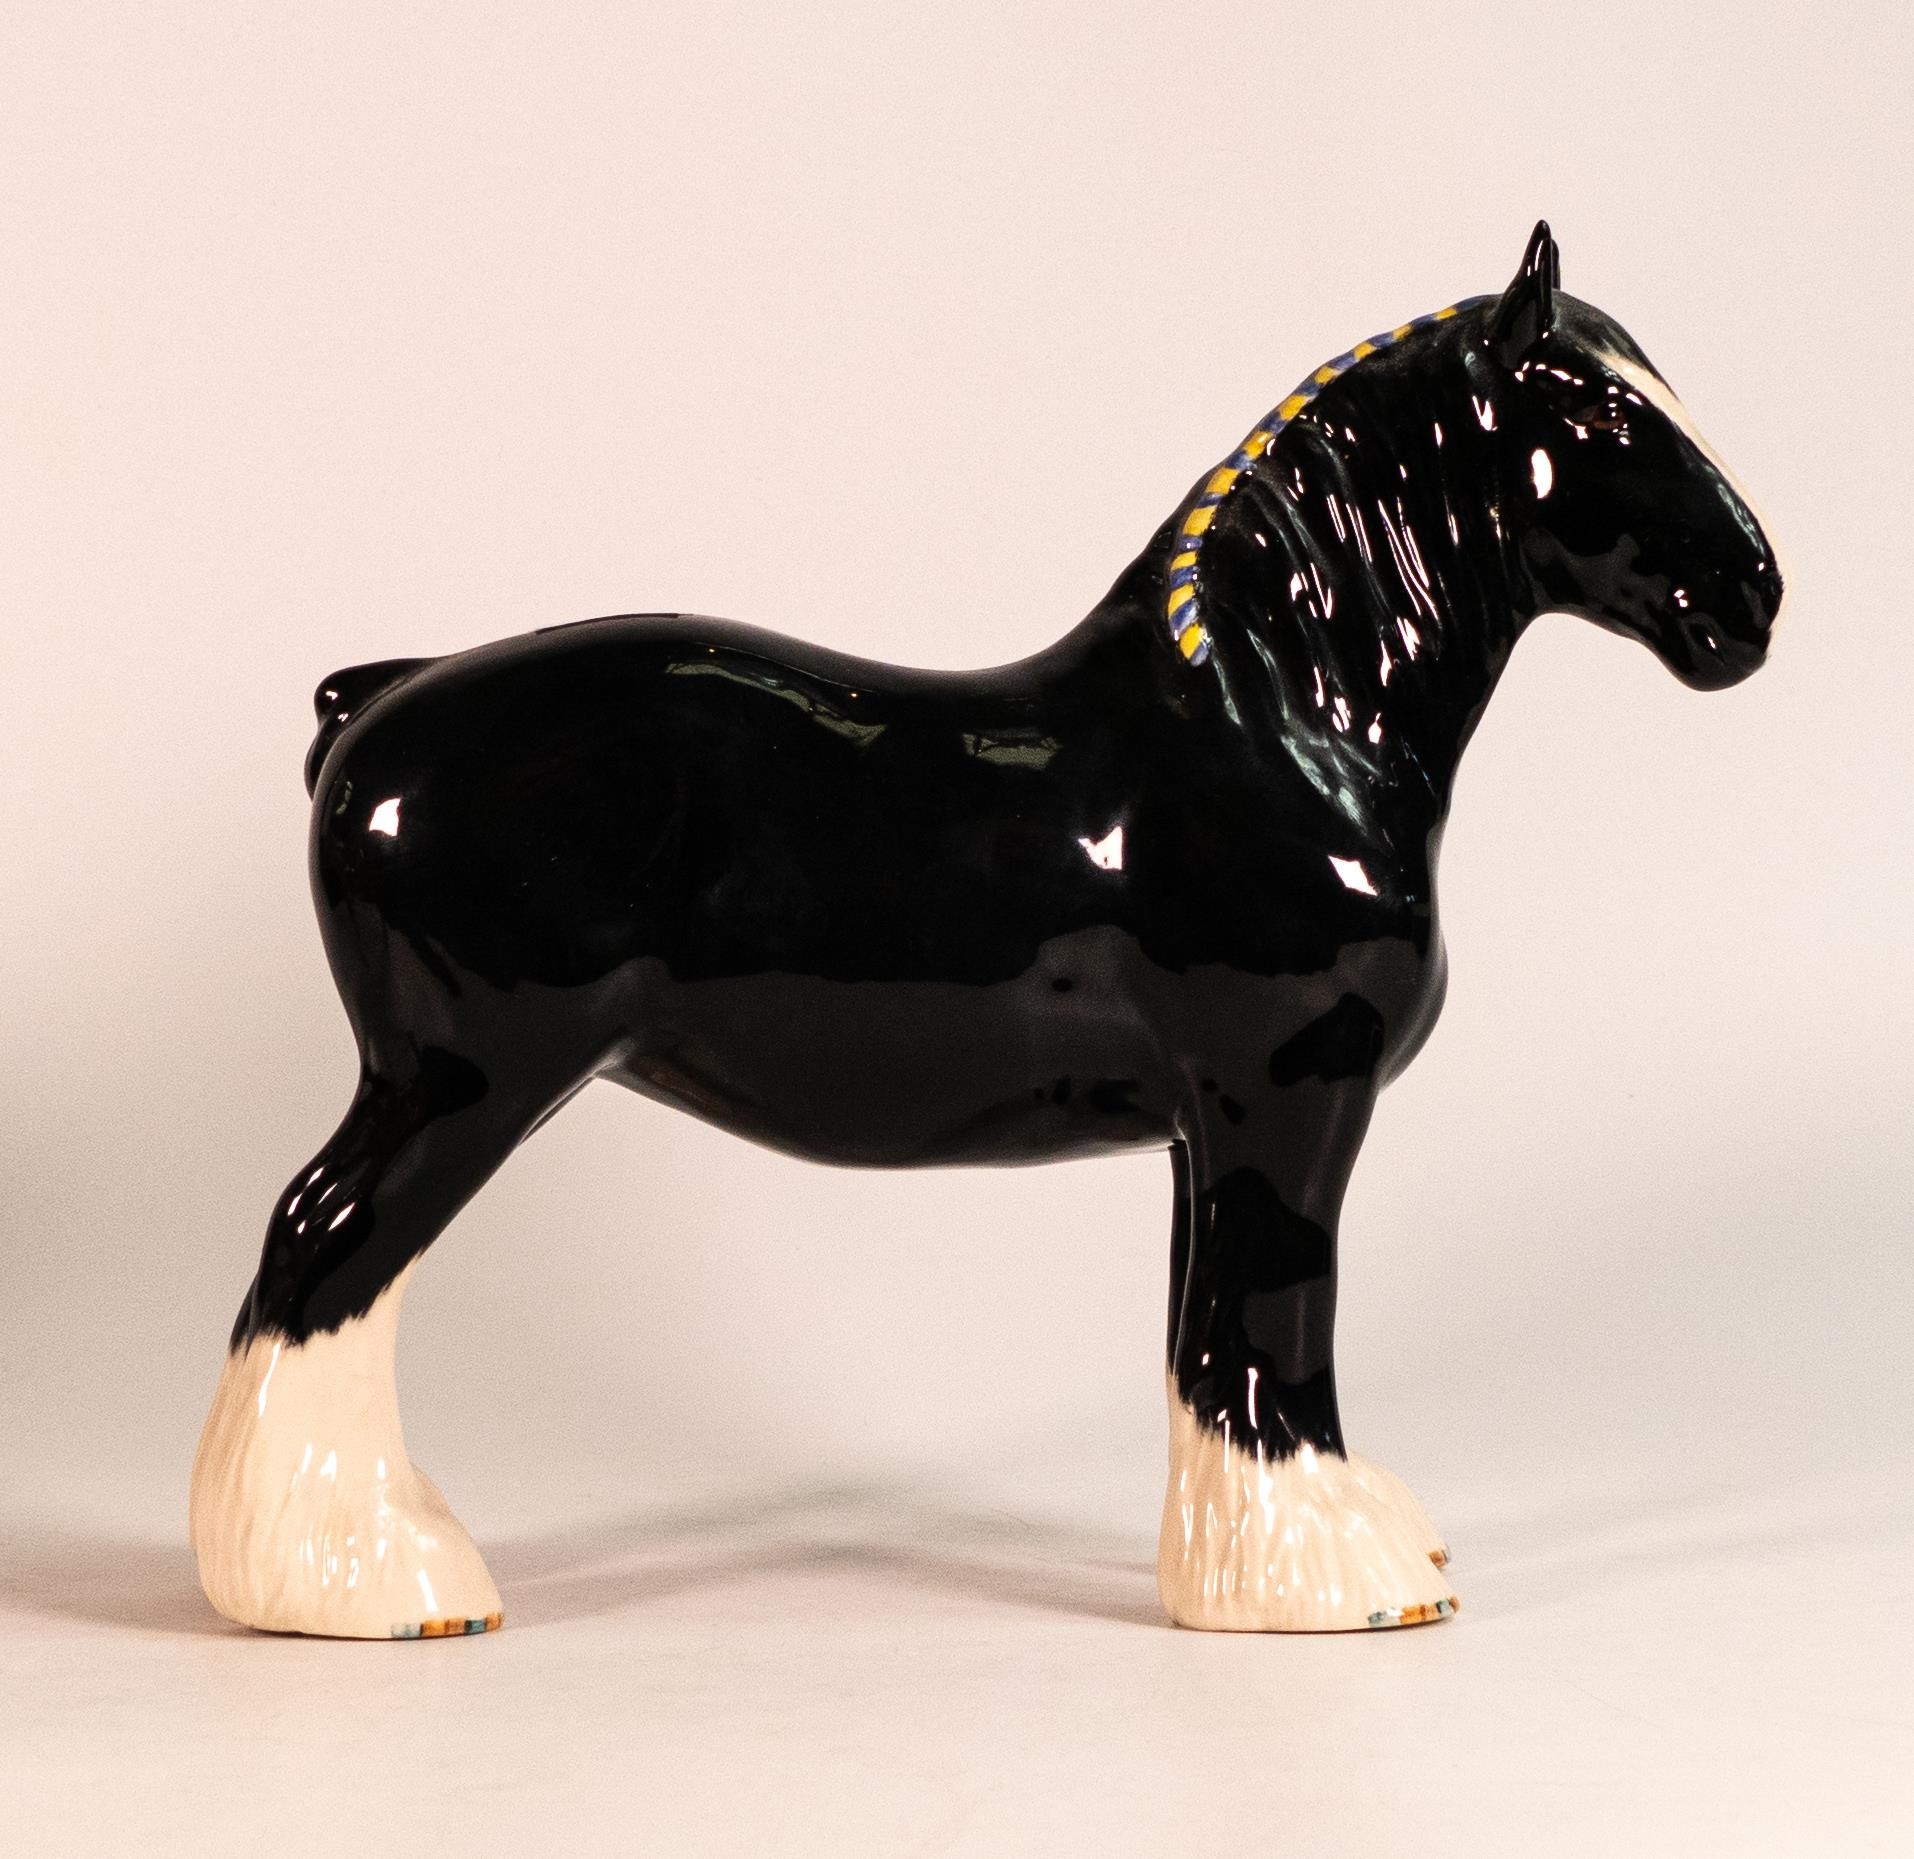 Beswick black Shire horse 818, collectors club special. Gold back stamp but no BCC marking.